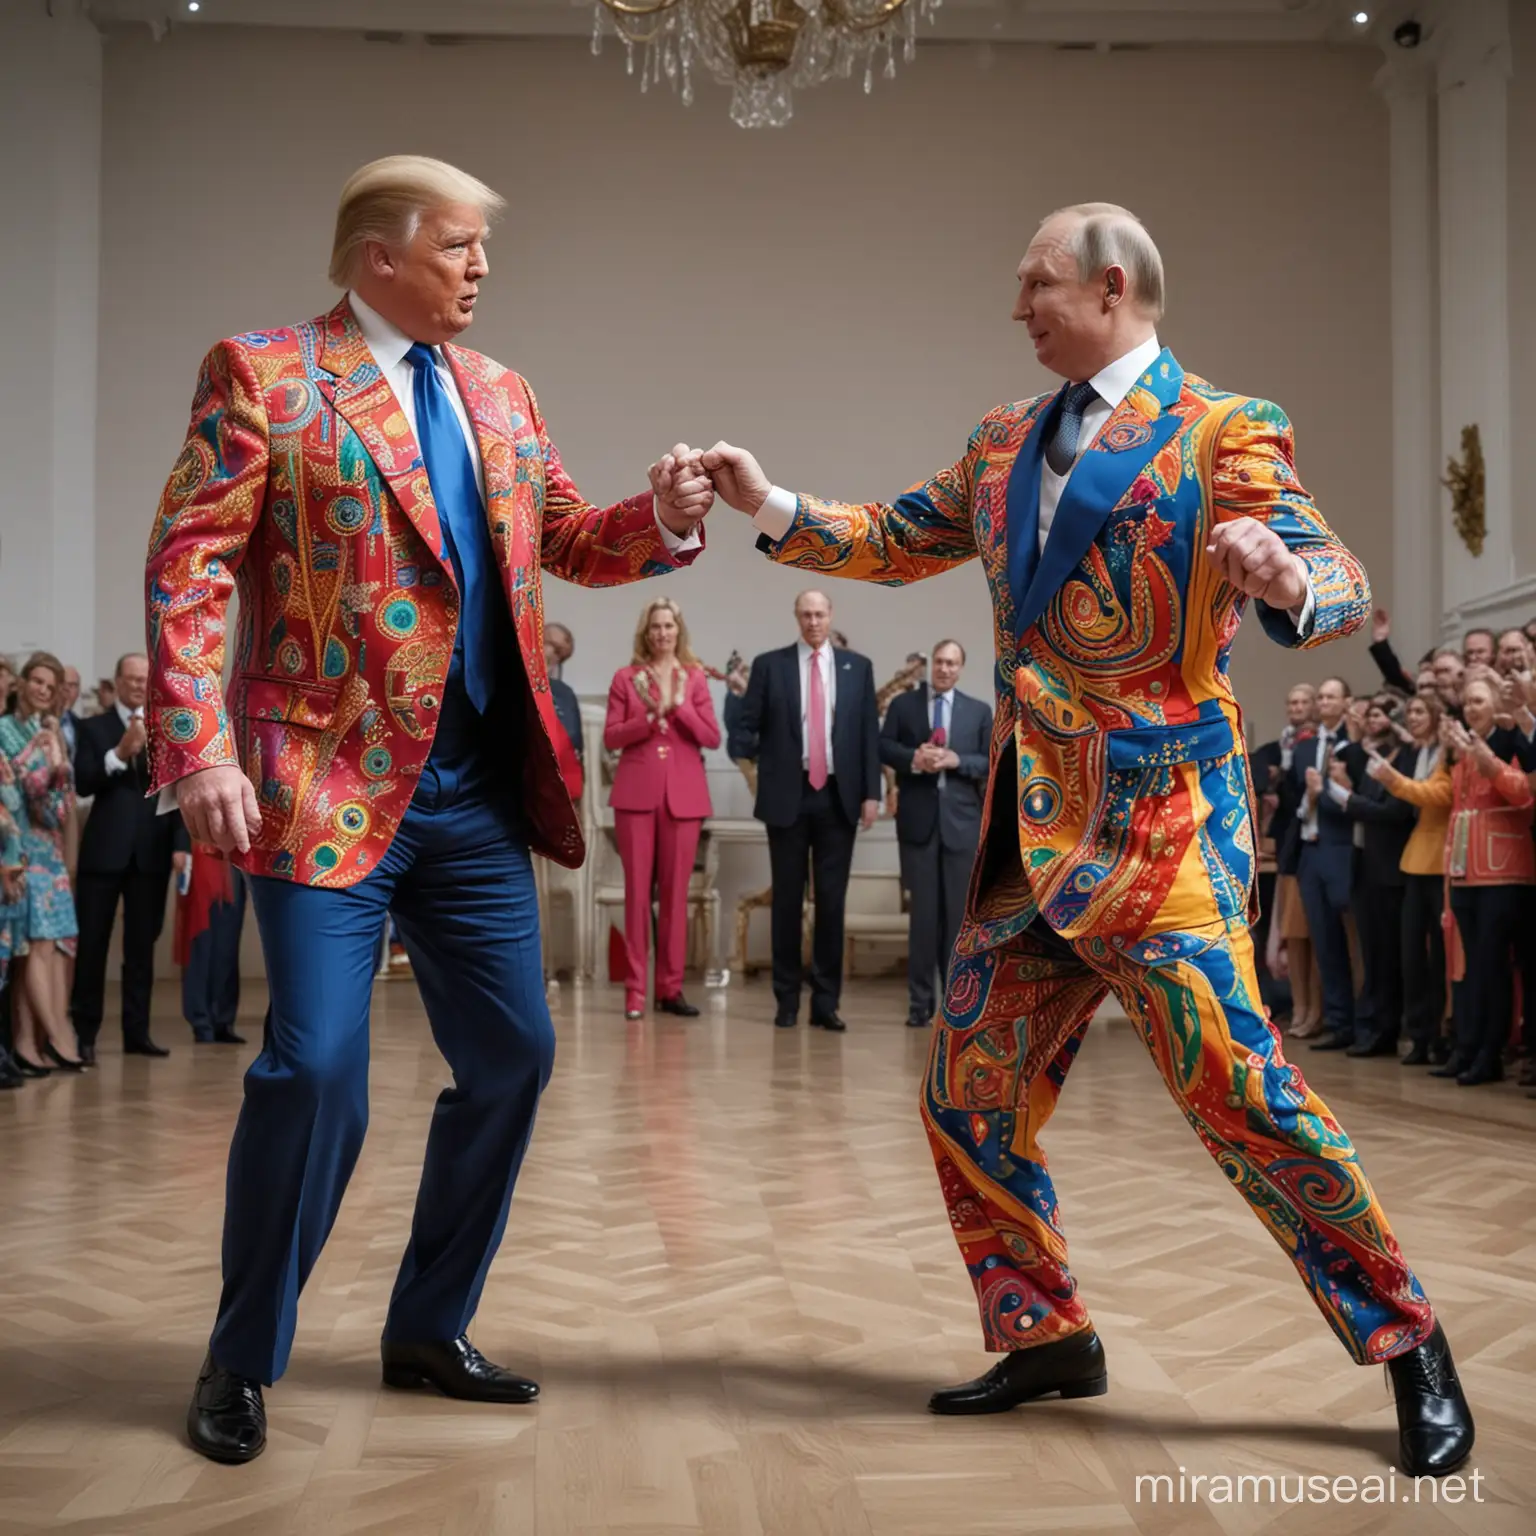 dancing trump and putin with colorful  costume